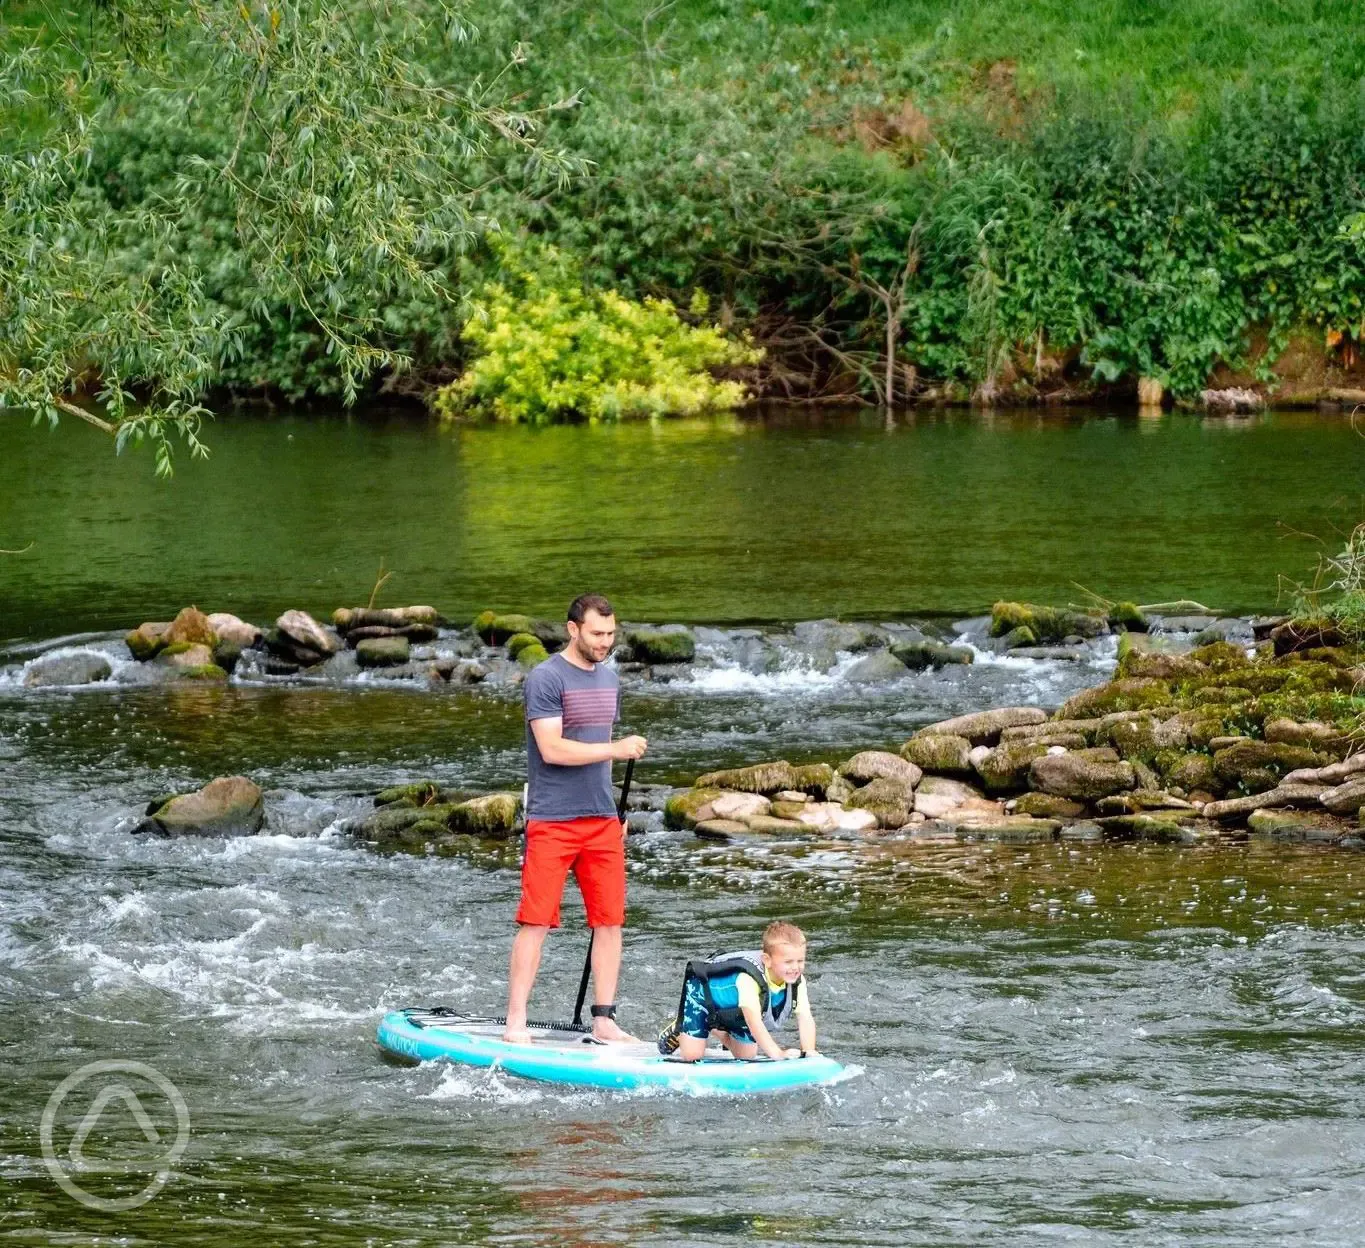 Paddleboarding on the River Wye